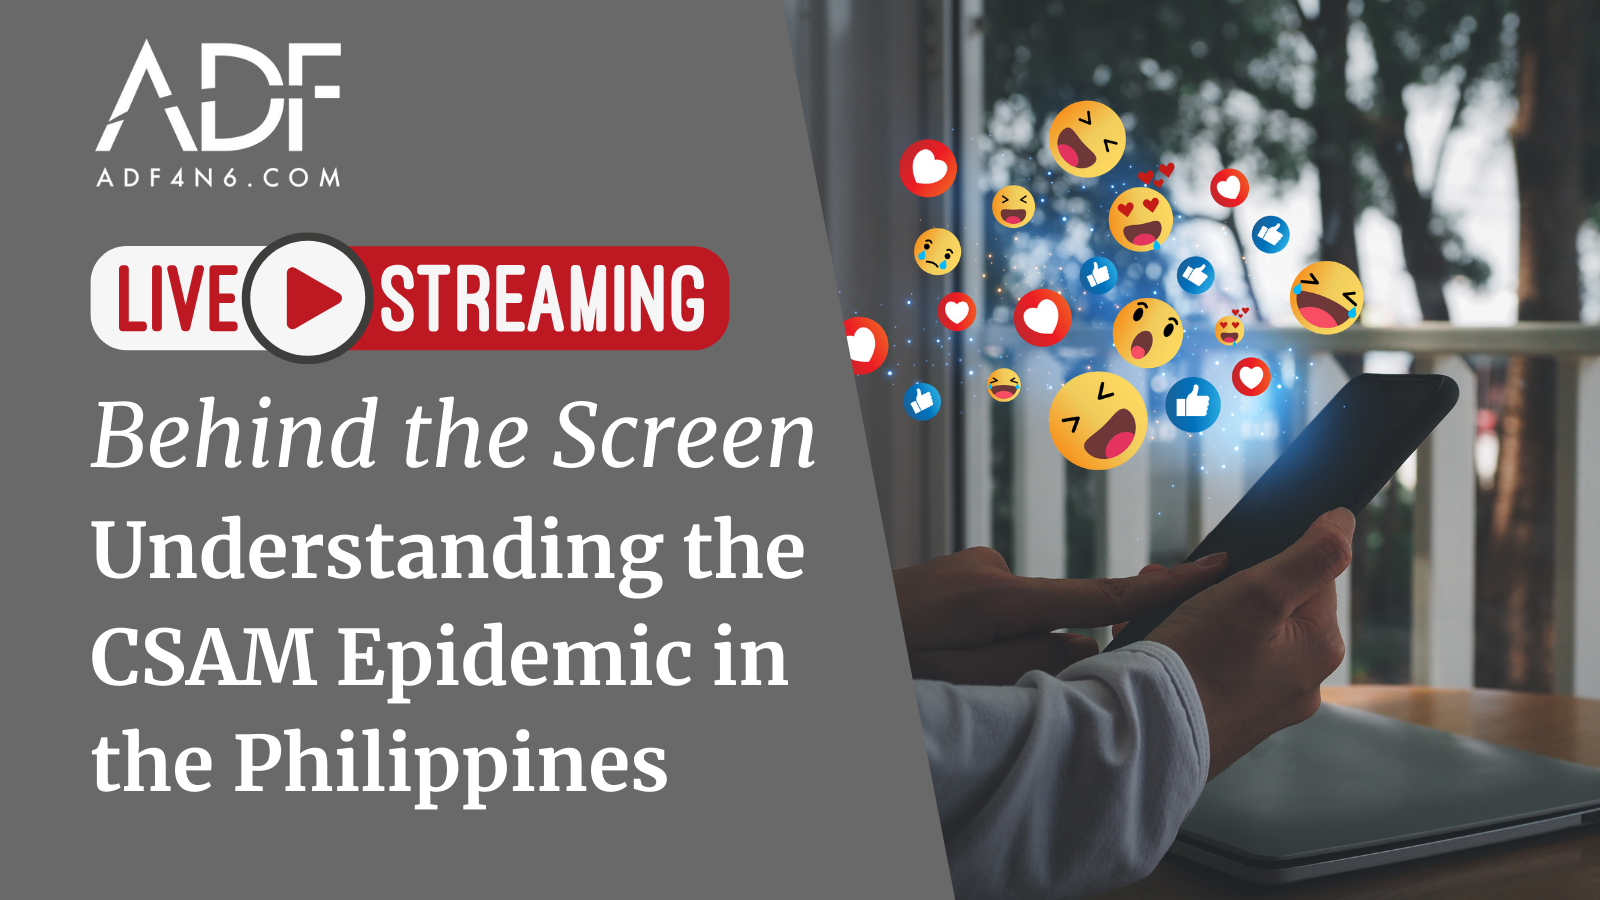 Behind the Screen: Understanding the CSAM Epidemic in the Philippines